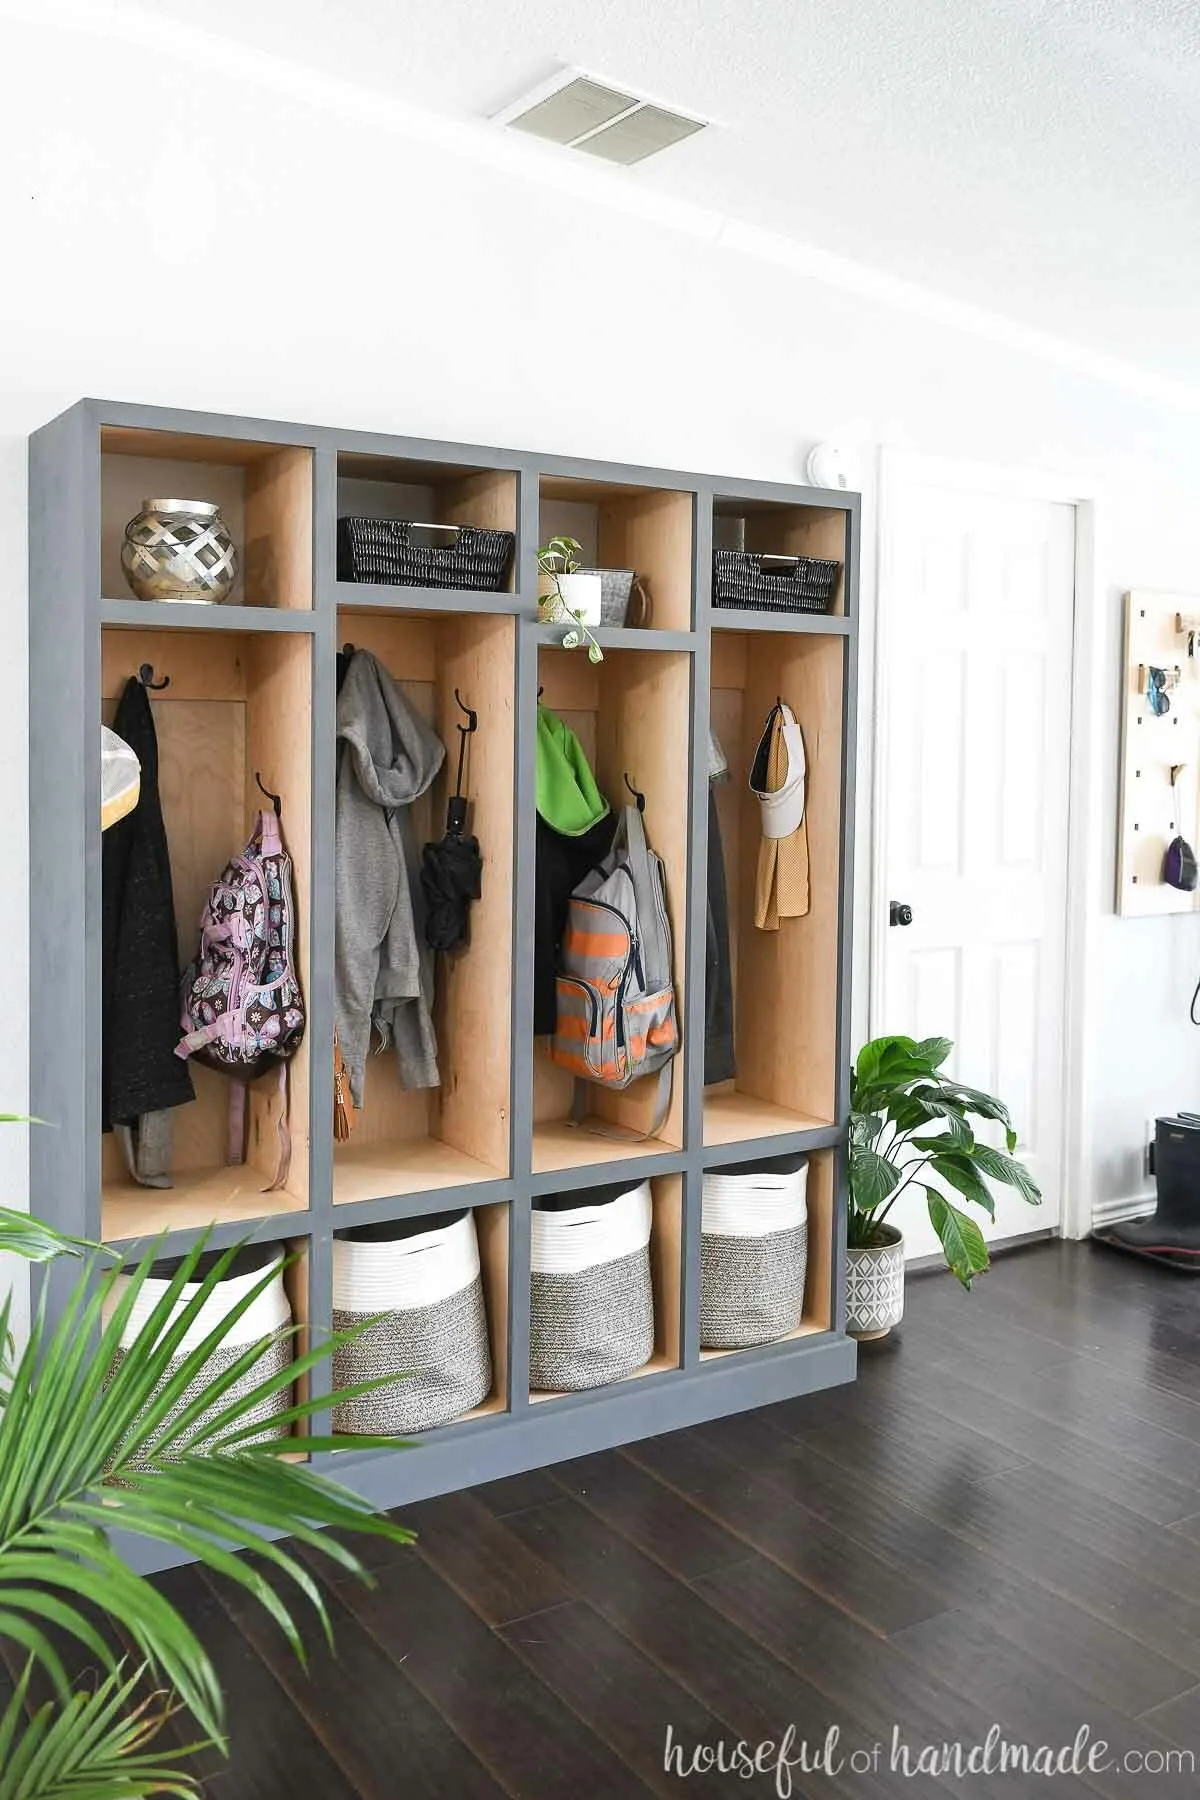 DIY mudroom storage lockers with natural wood tone on the inside and gray-blue painted outside in an entryway filled with coats and backpacks.